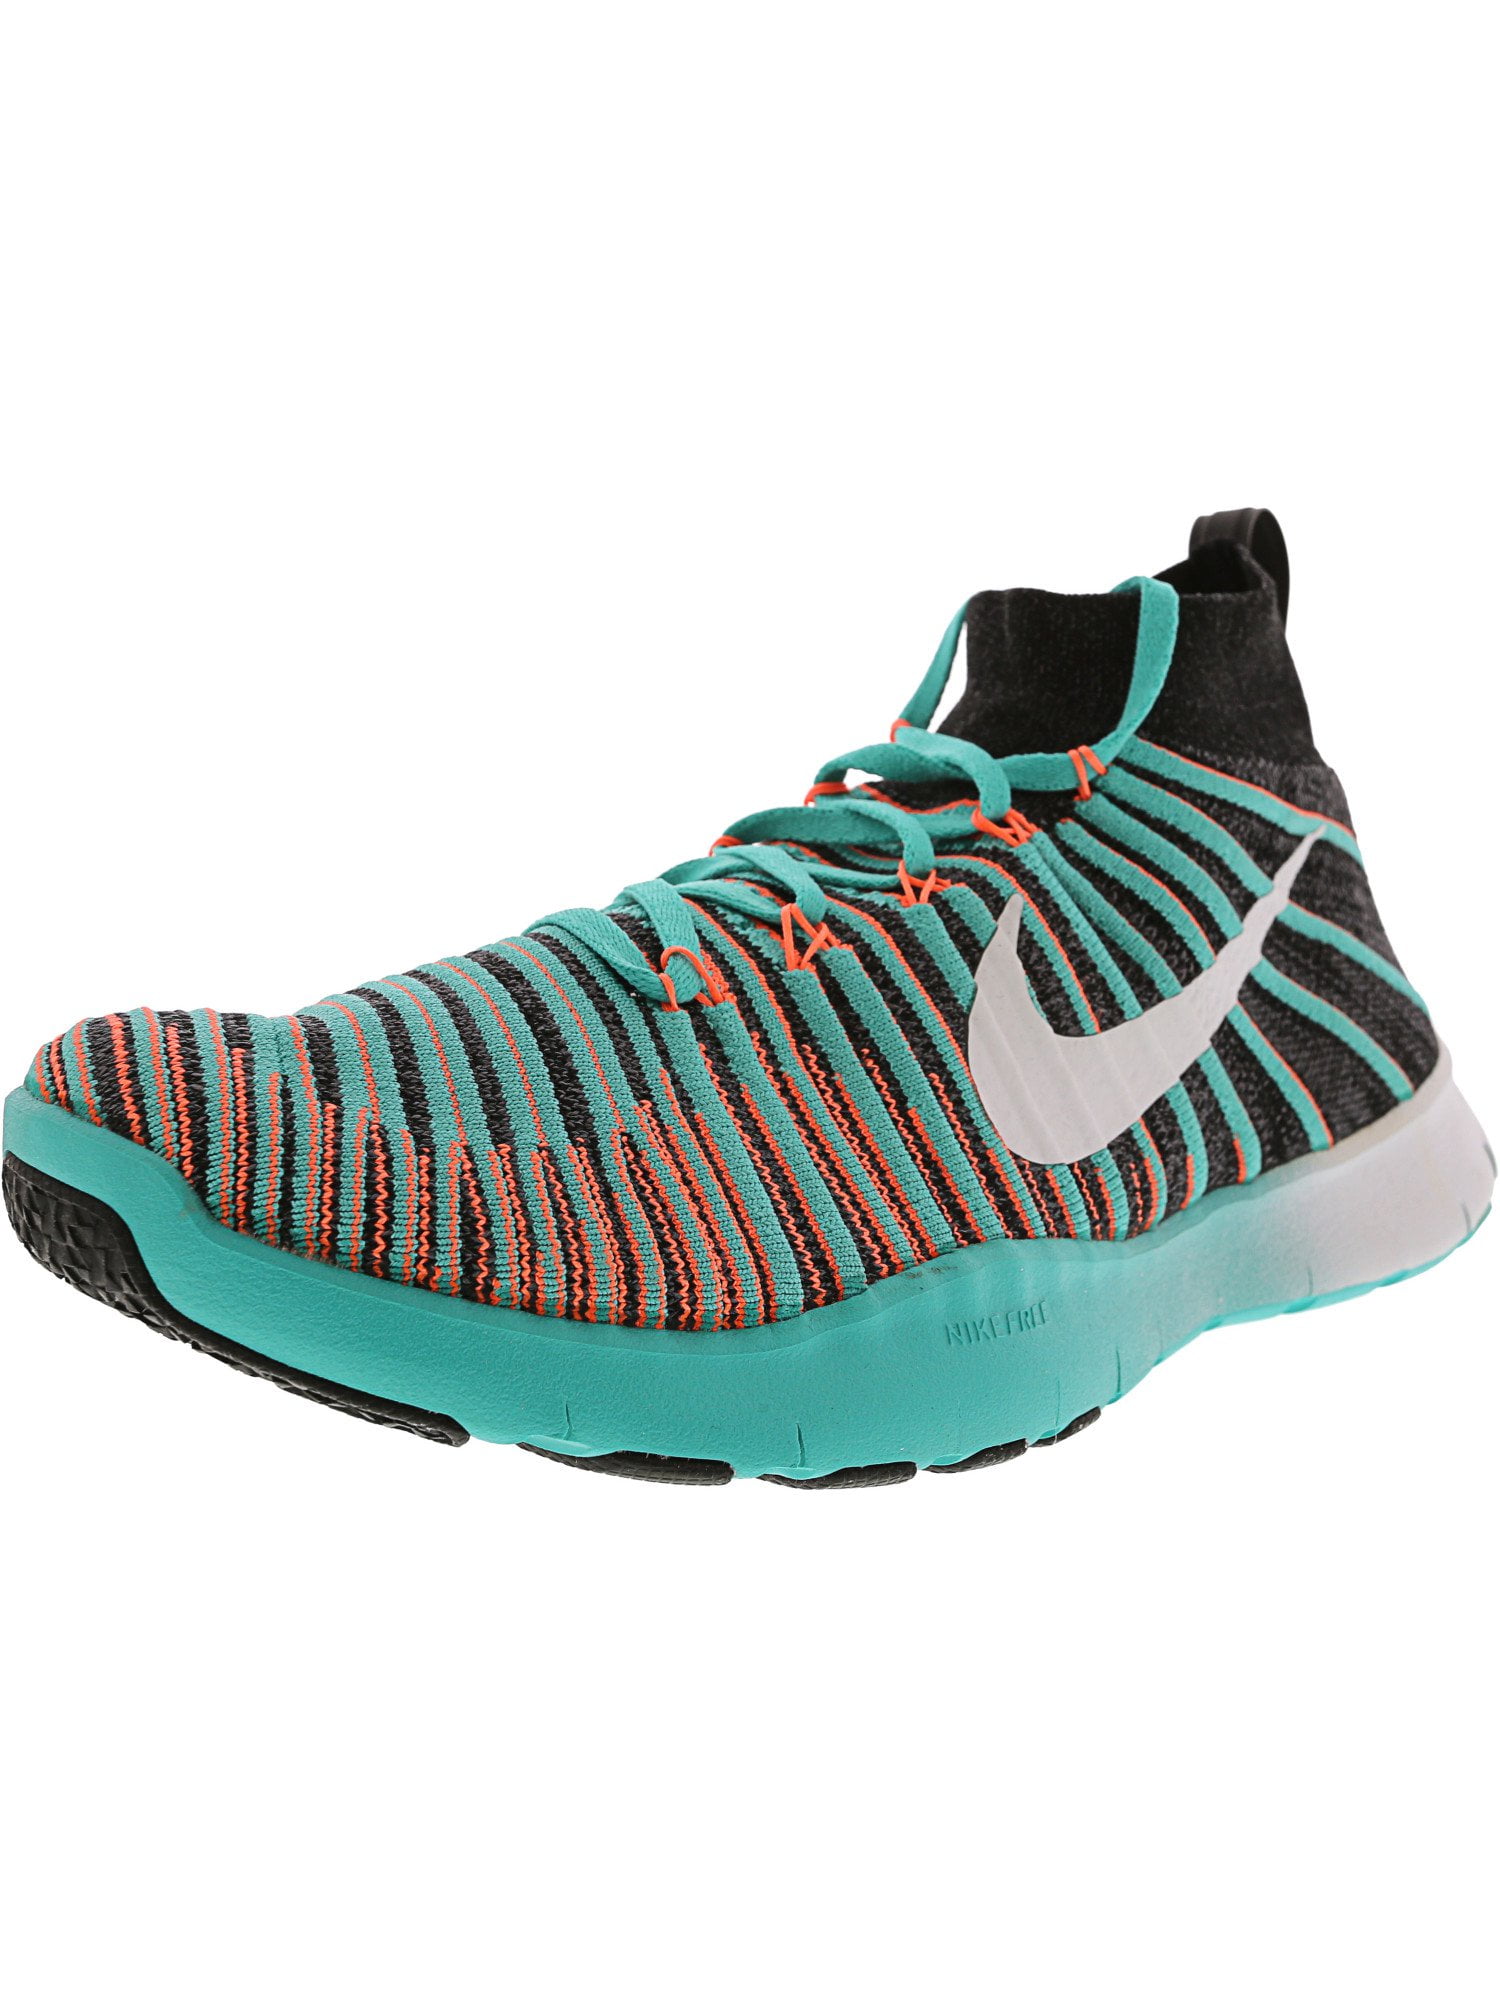 nike free pair of shoes